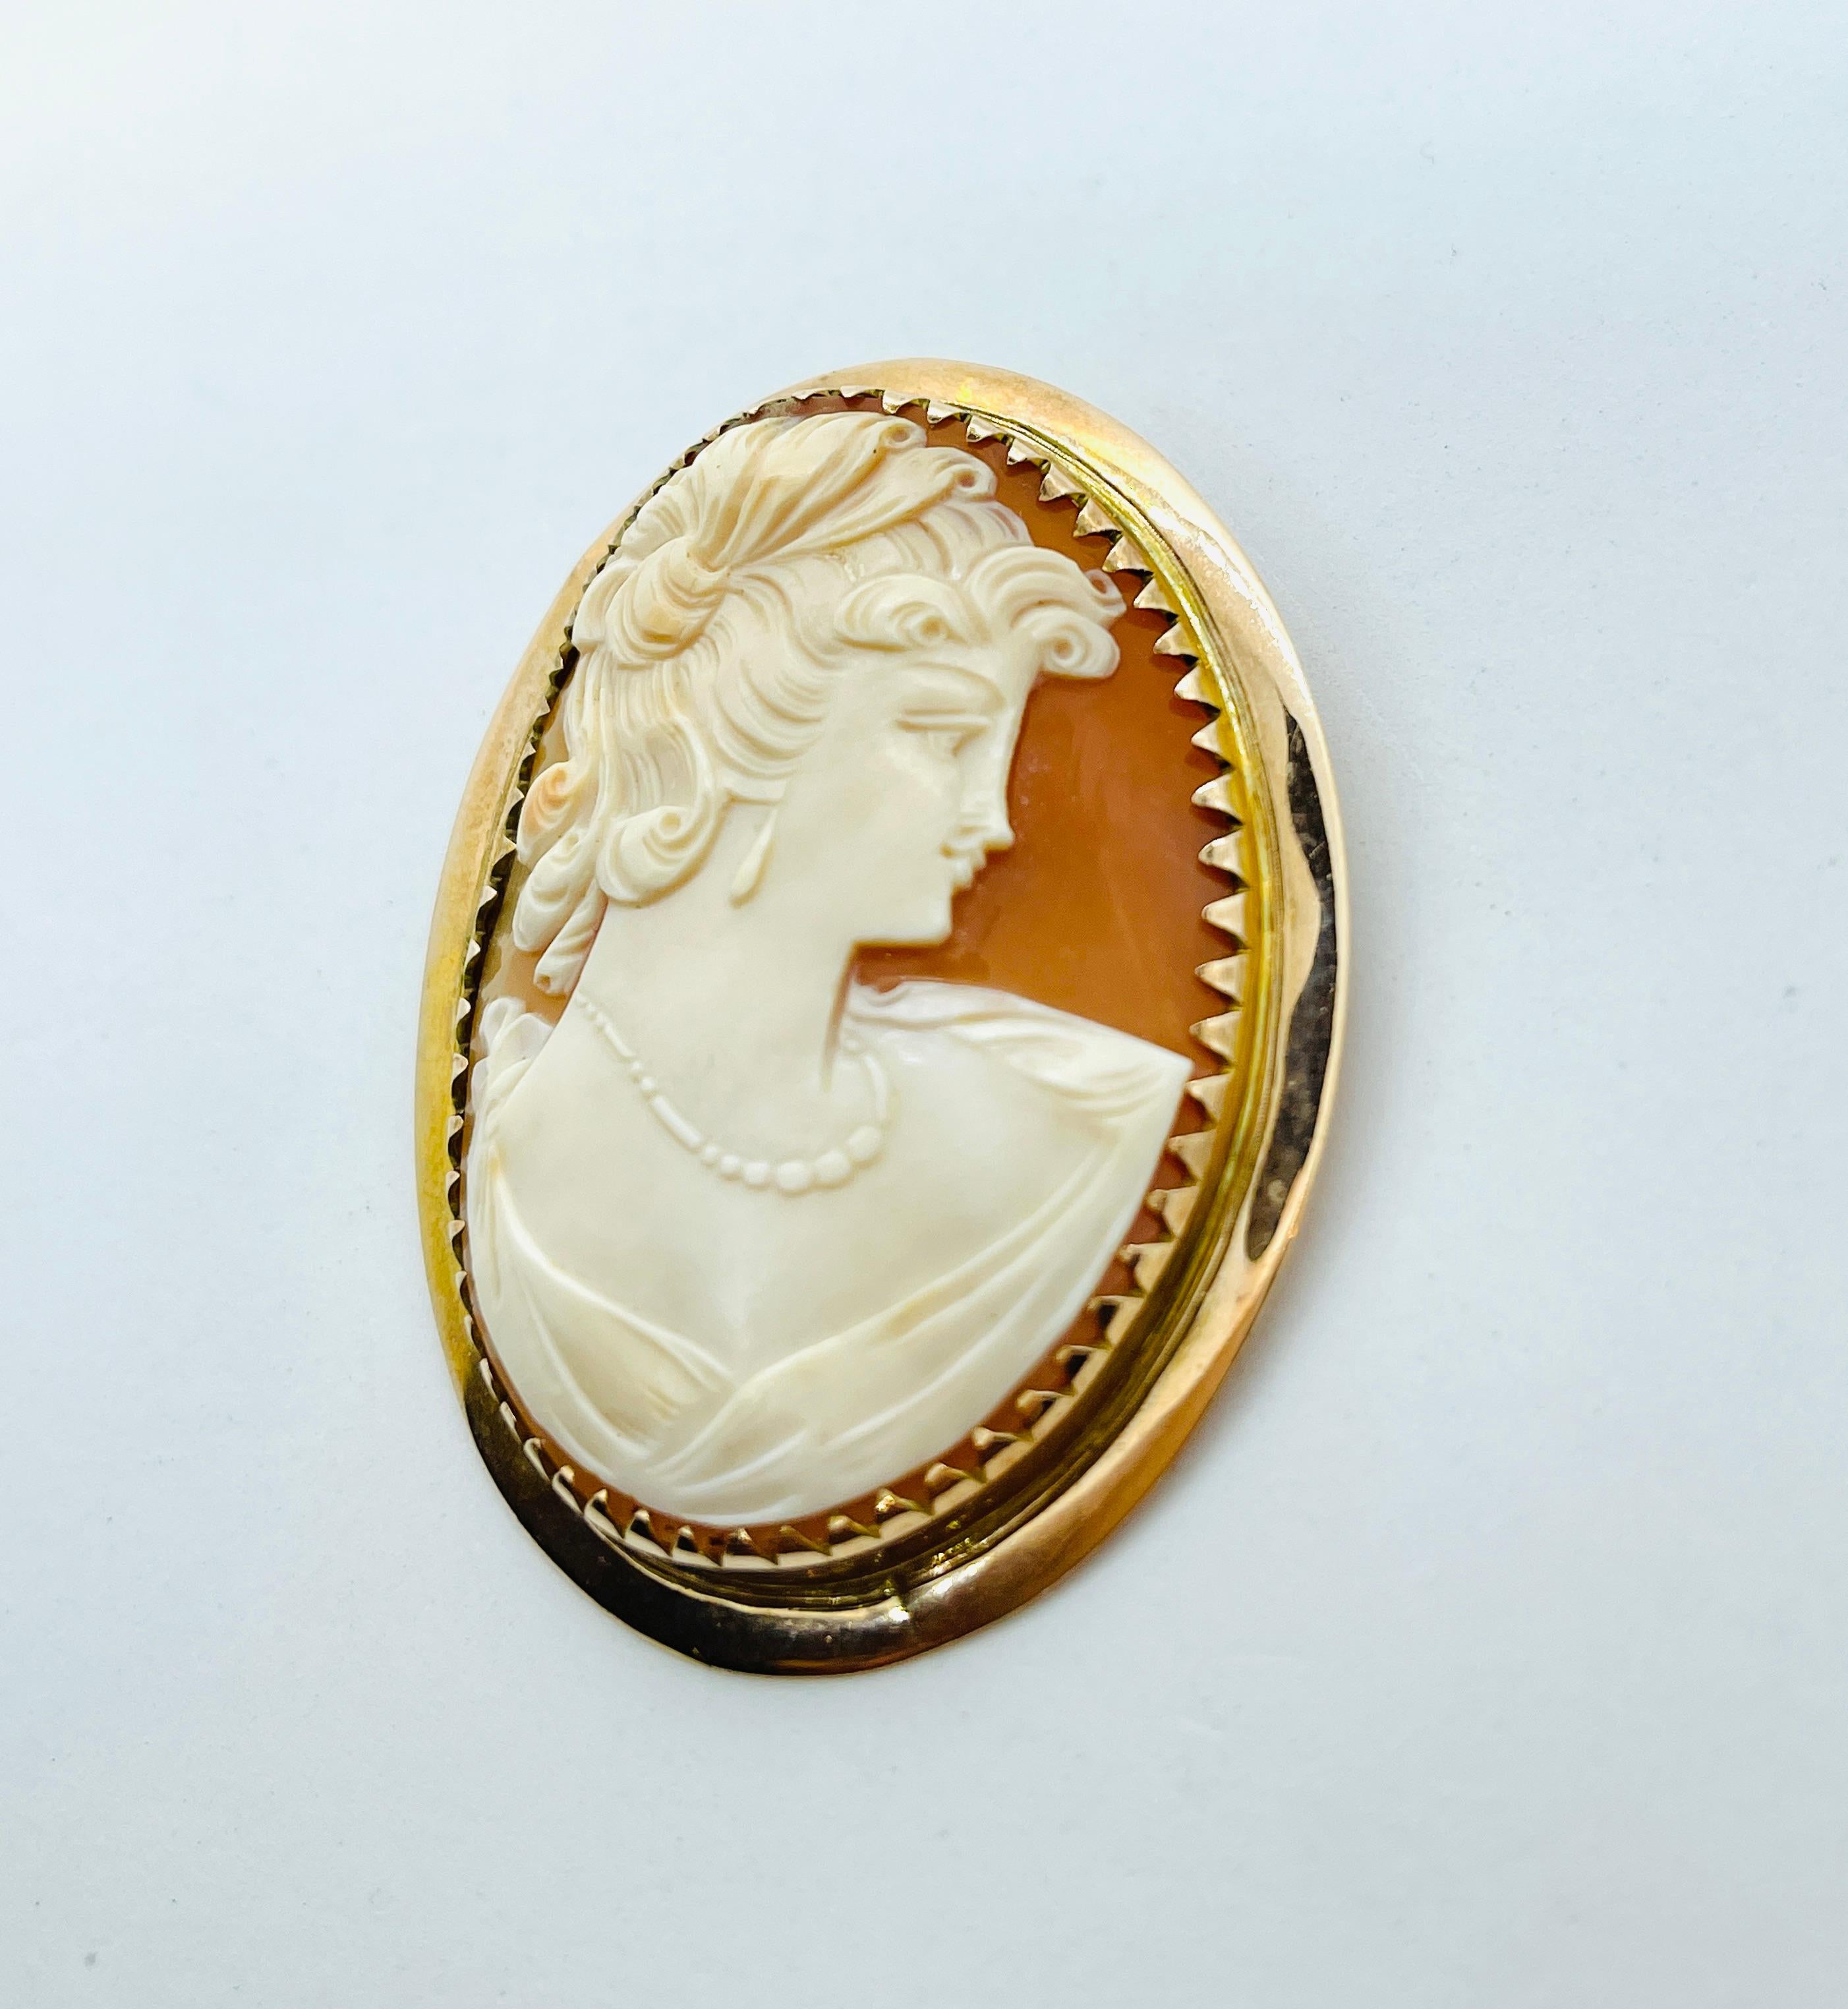 Vintage 9ct Gold Cameo Brooch NeoClassical Lady Wearing Earrings Necklace c1940s For Sale 1